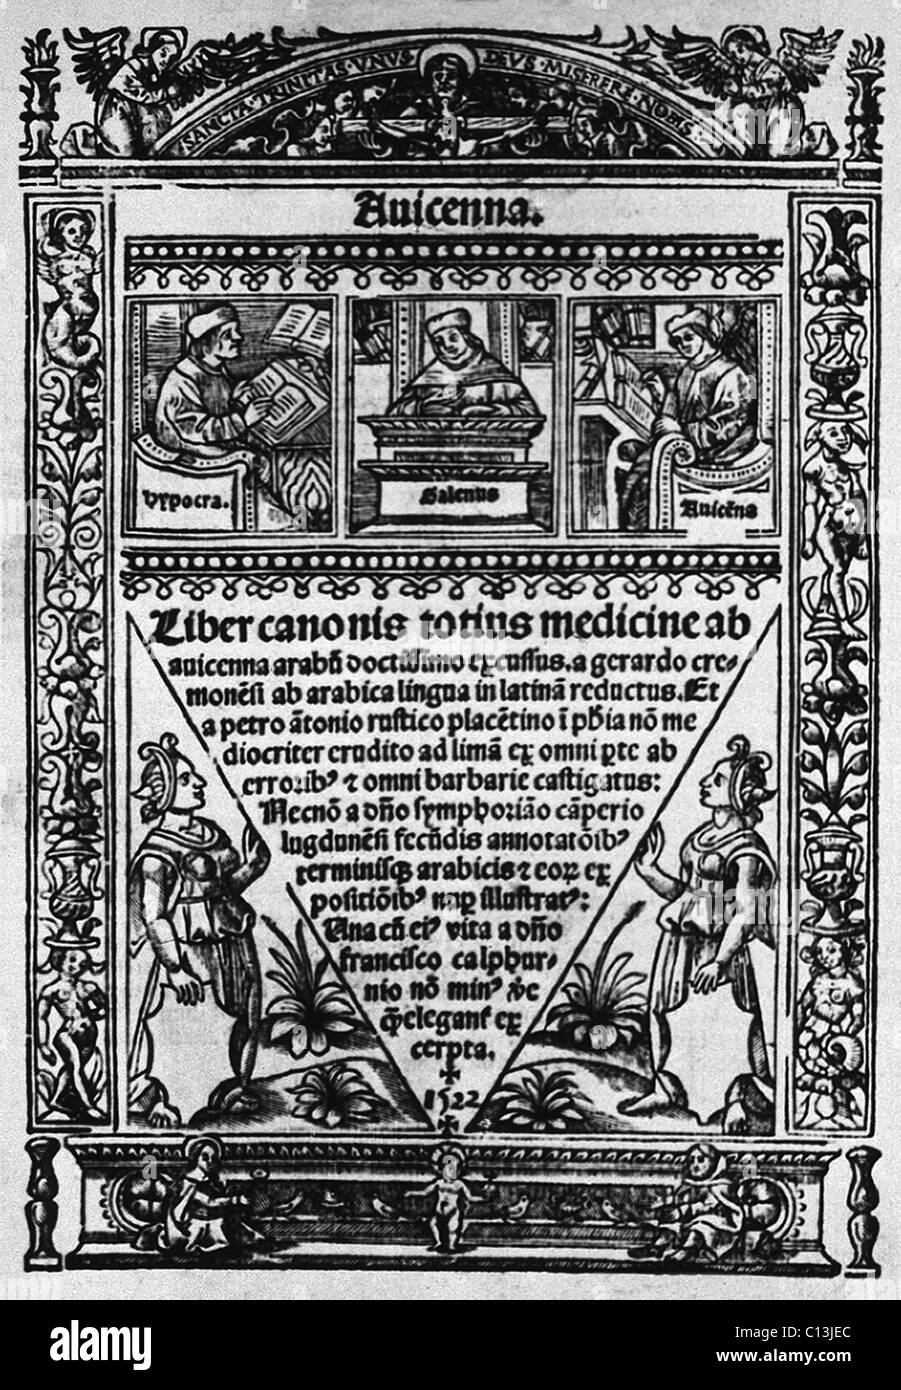 Title page of Avicenna's, LIBER CANONIS TOTIUS MEDICINE (CANON OF MEDICINE), published in Paris in 1522. The systematic encyclopedia was based on Greek and Roman medicine with Avicenna's additions. Hippocrates, Galen and Avicenna art pictured at top. Stock Photo